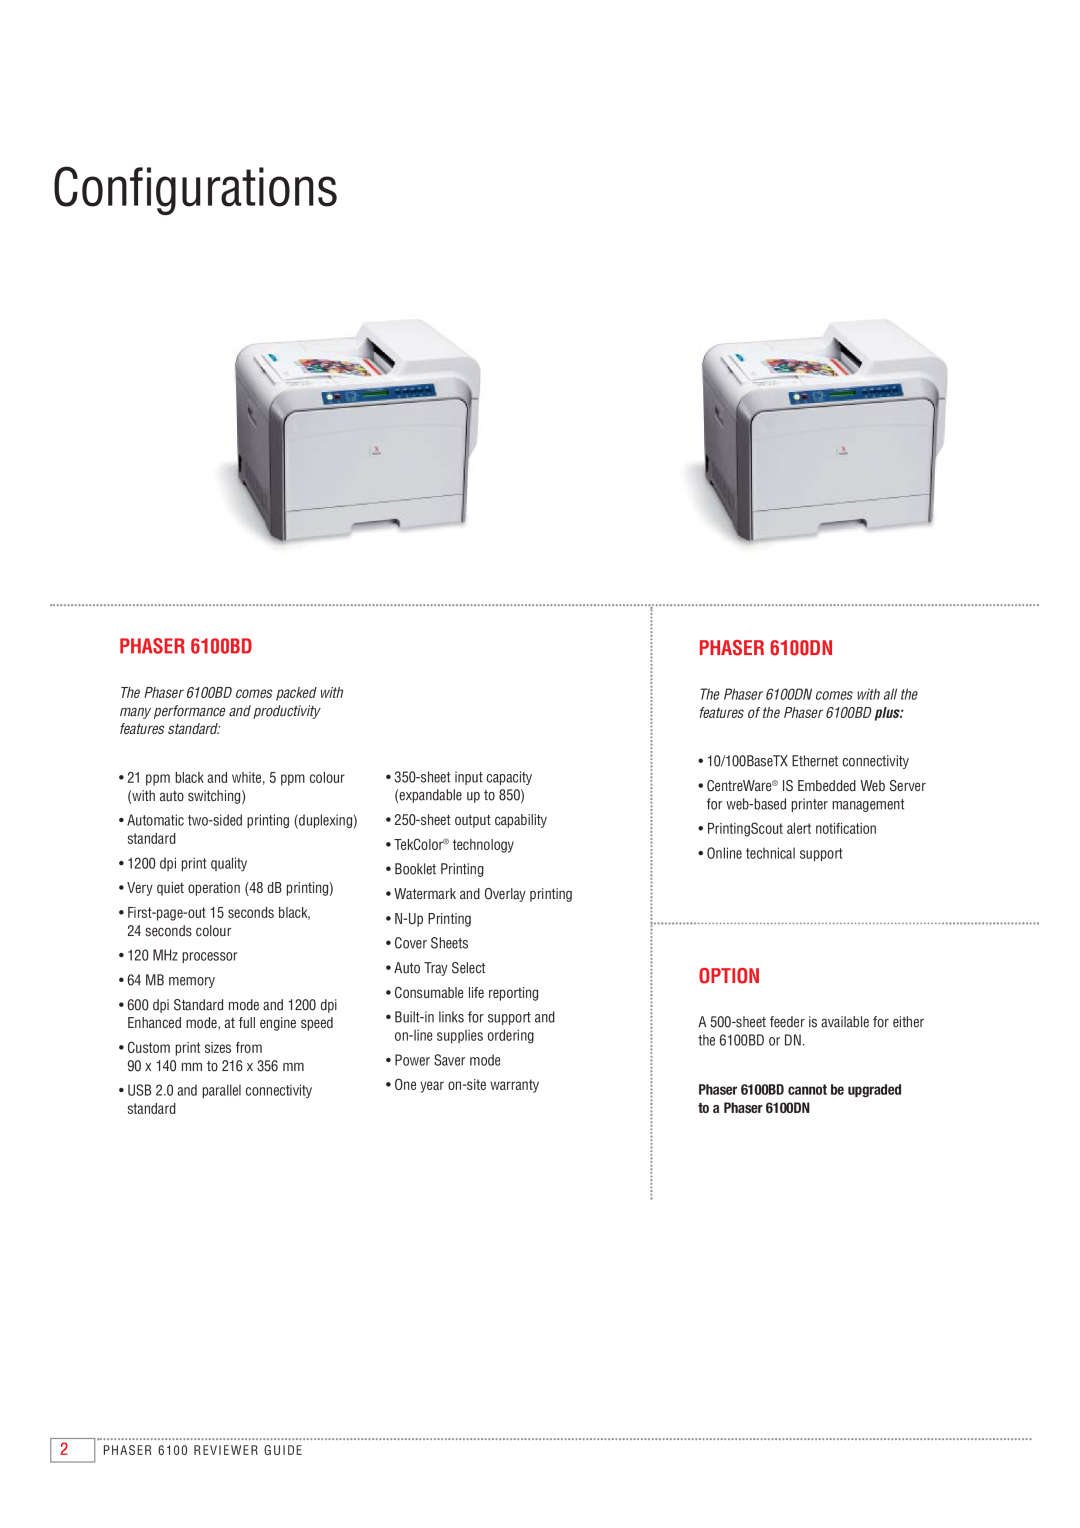 Xerox manual PHASER 6100BD, PHASER 6100DN, Option, Configurations 